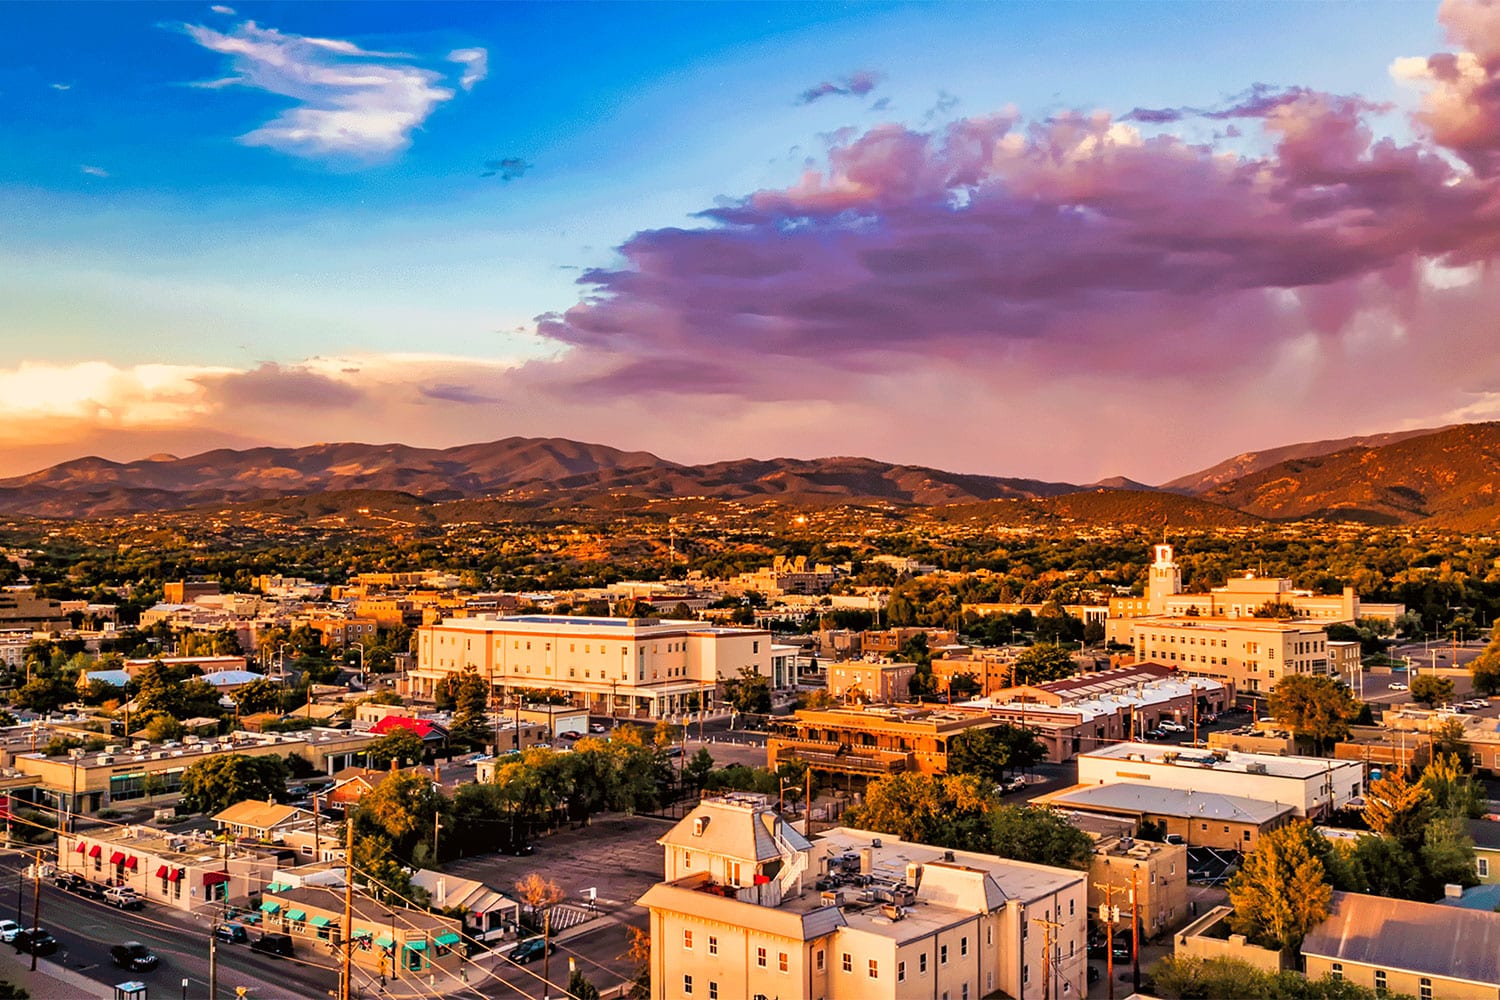 Aerial view of downtown Santa Fe and the Sangre de Cristo mountains